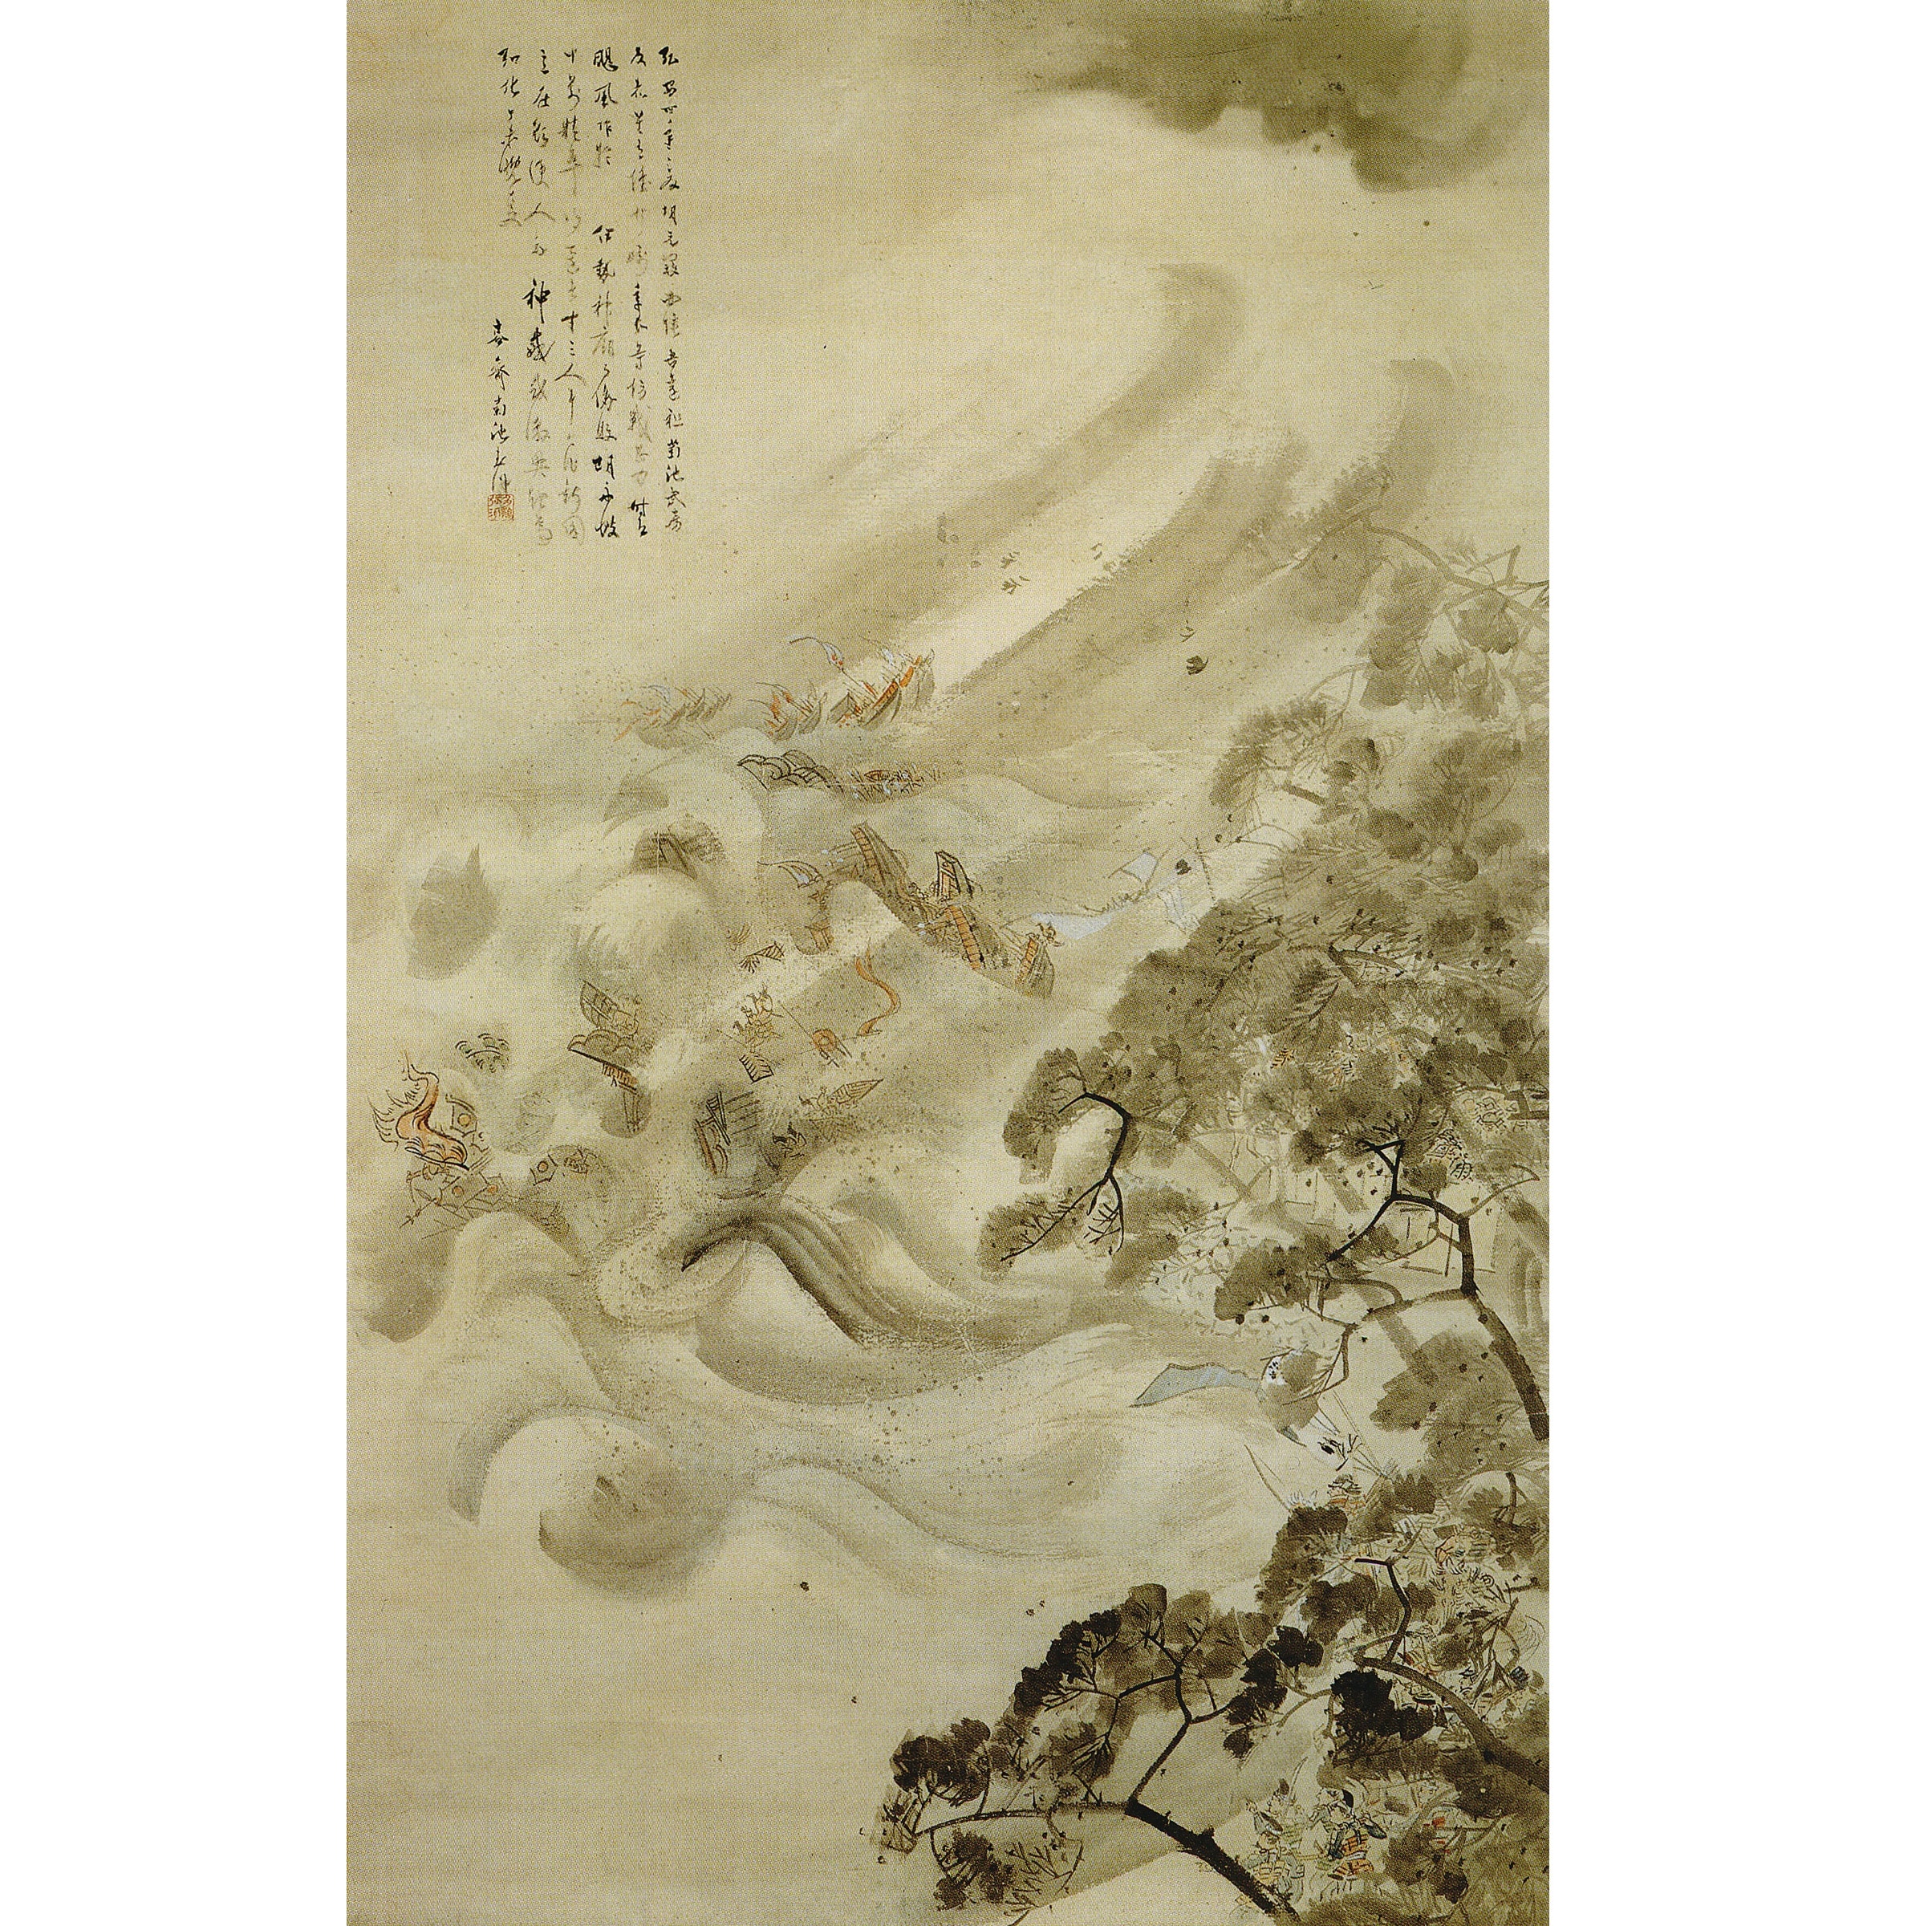 The Mongol invasion, hit by a typhoon